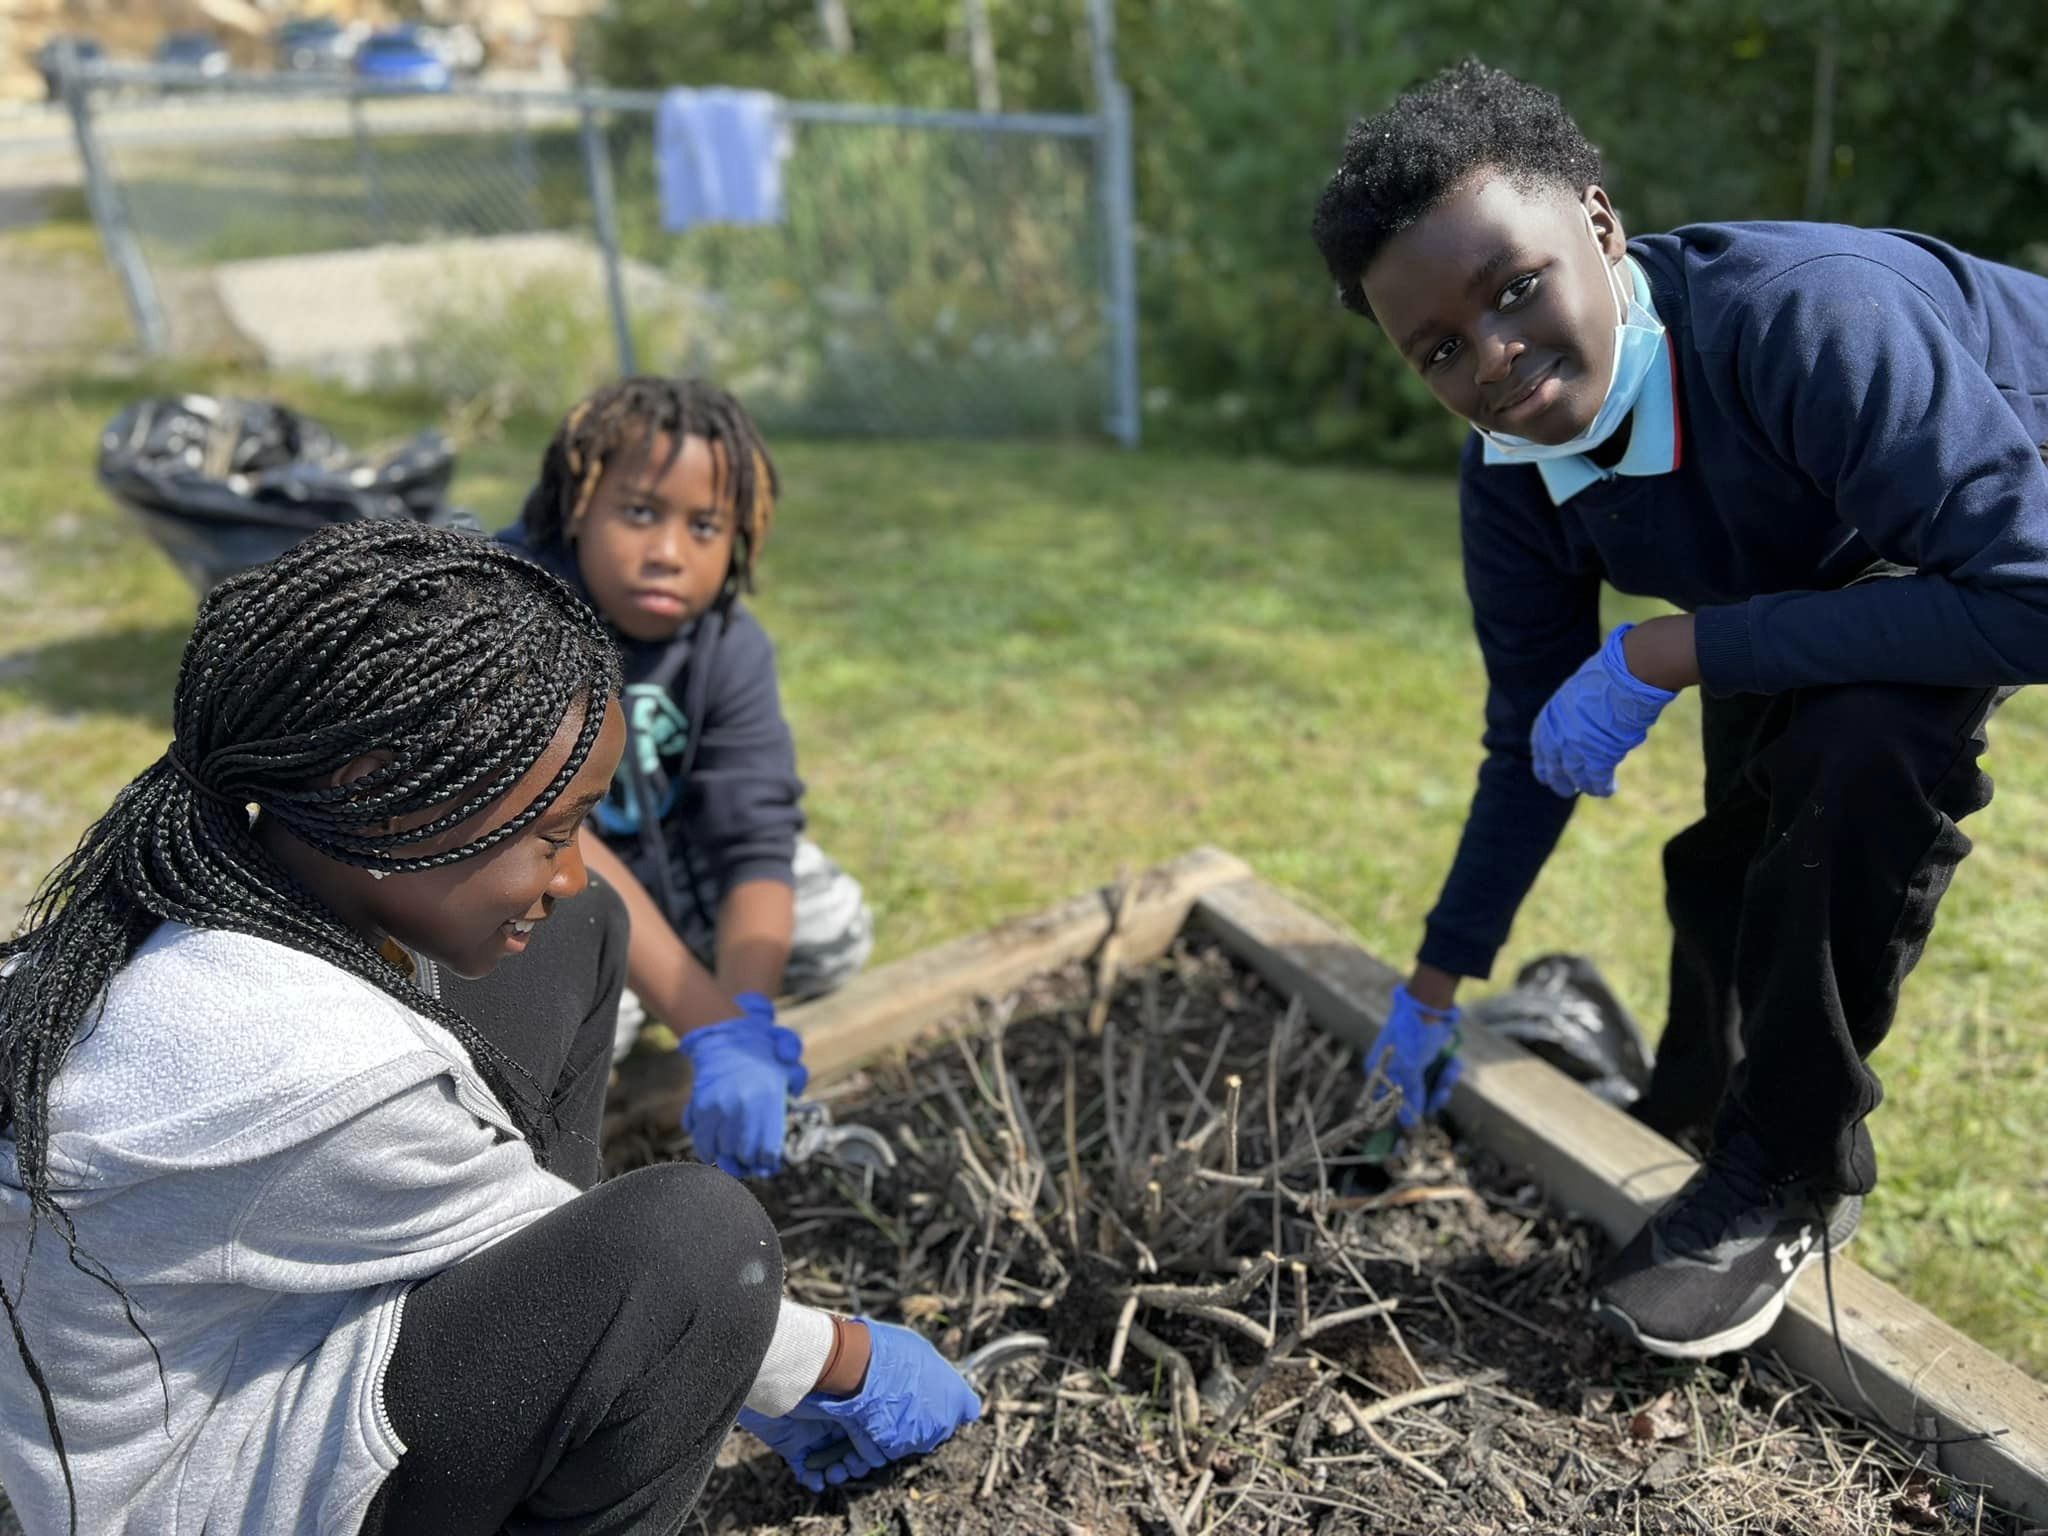 Students de-weeding and cleaning a garden bed at a school.